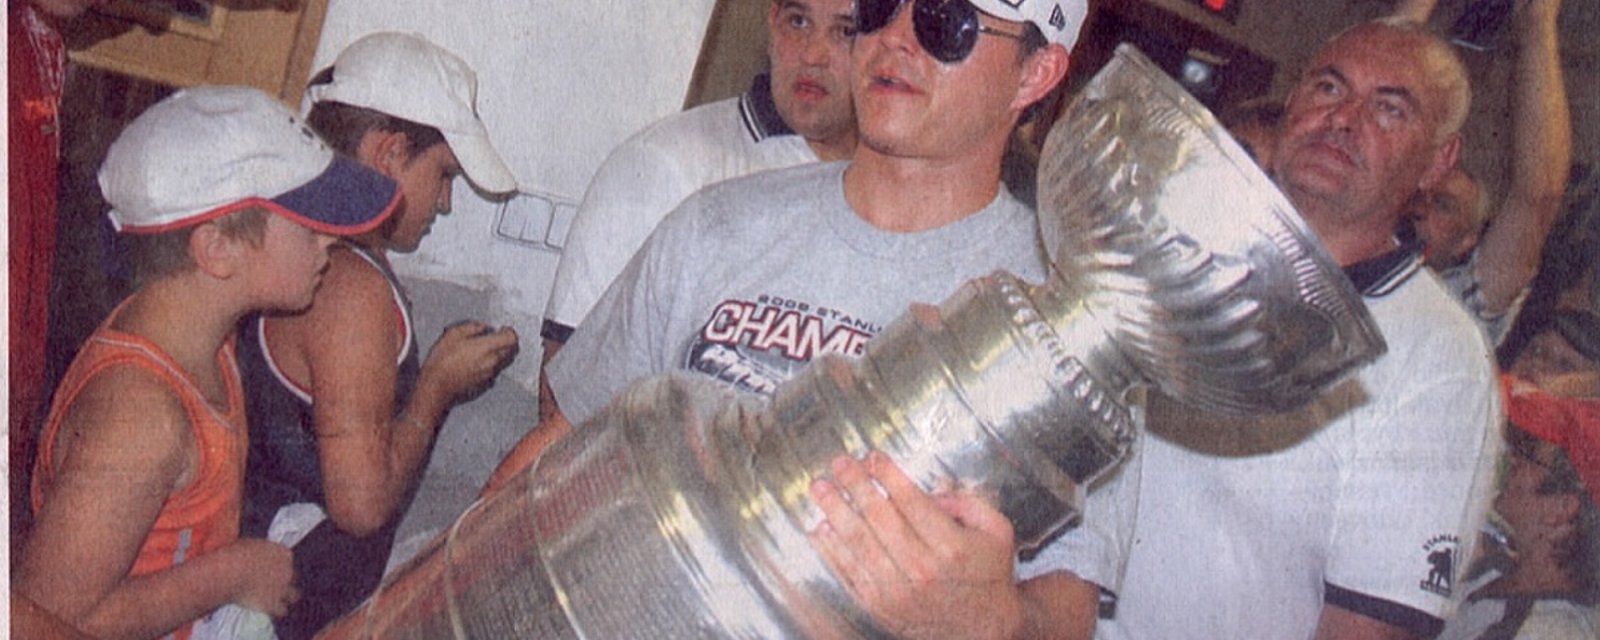 Former Stanley Cup Champion arrested after demanding cocaine &amp;amp; making death threats.